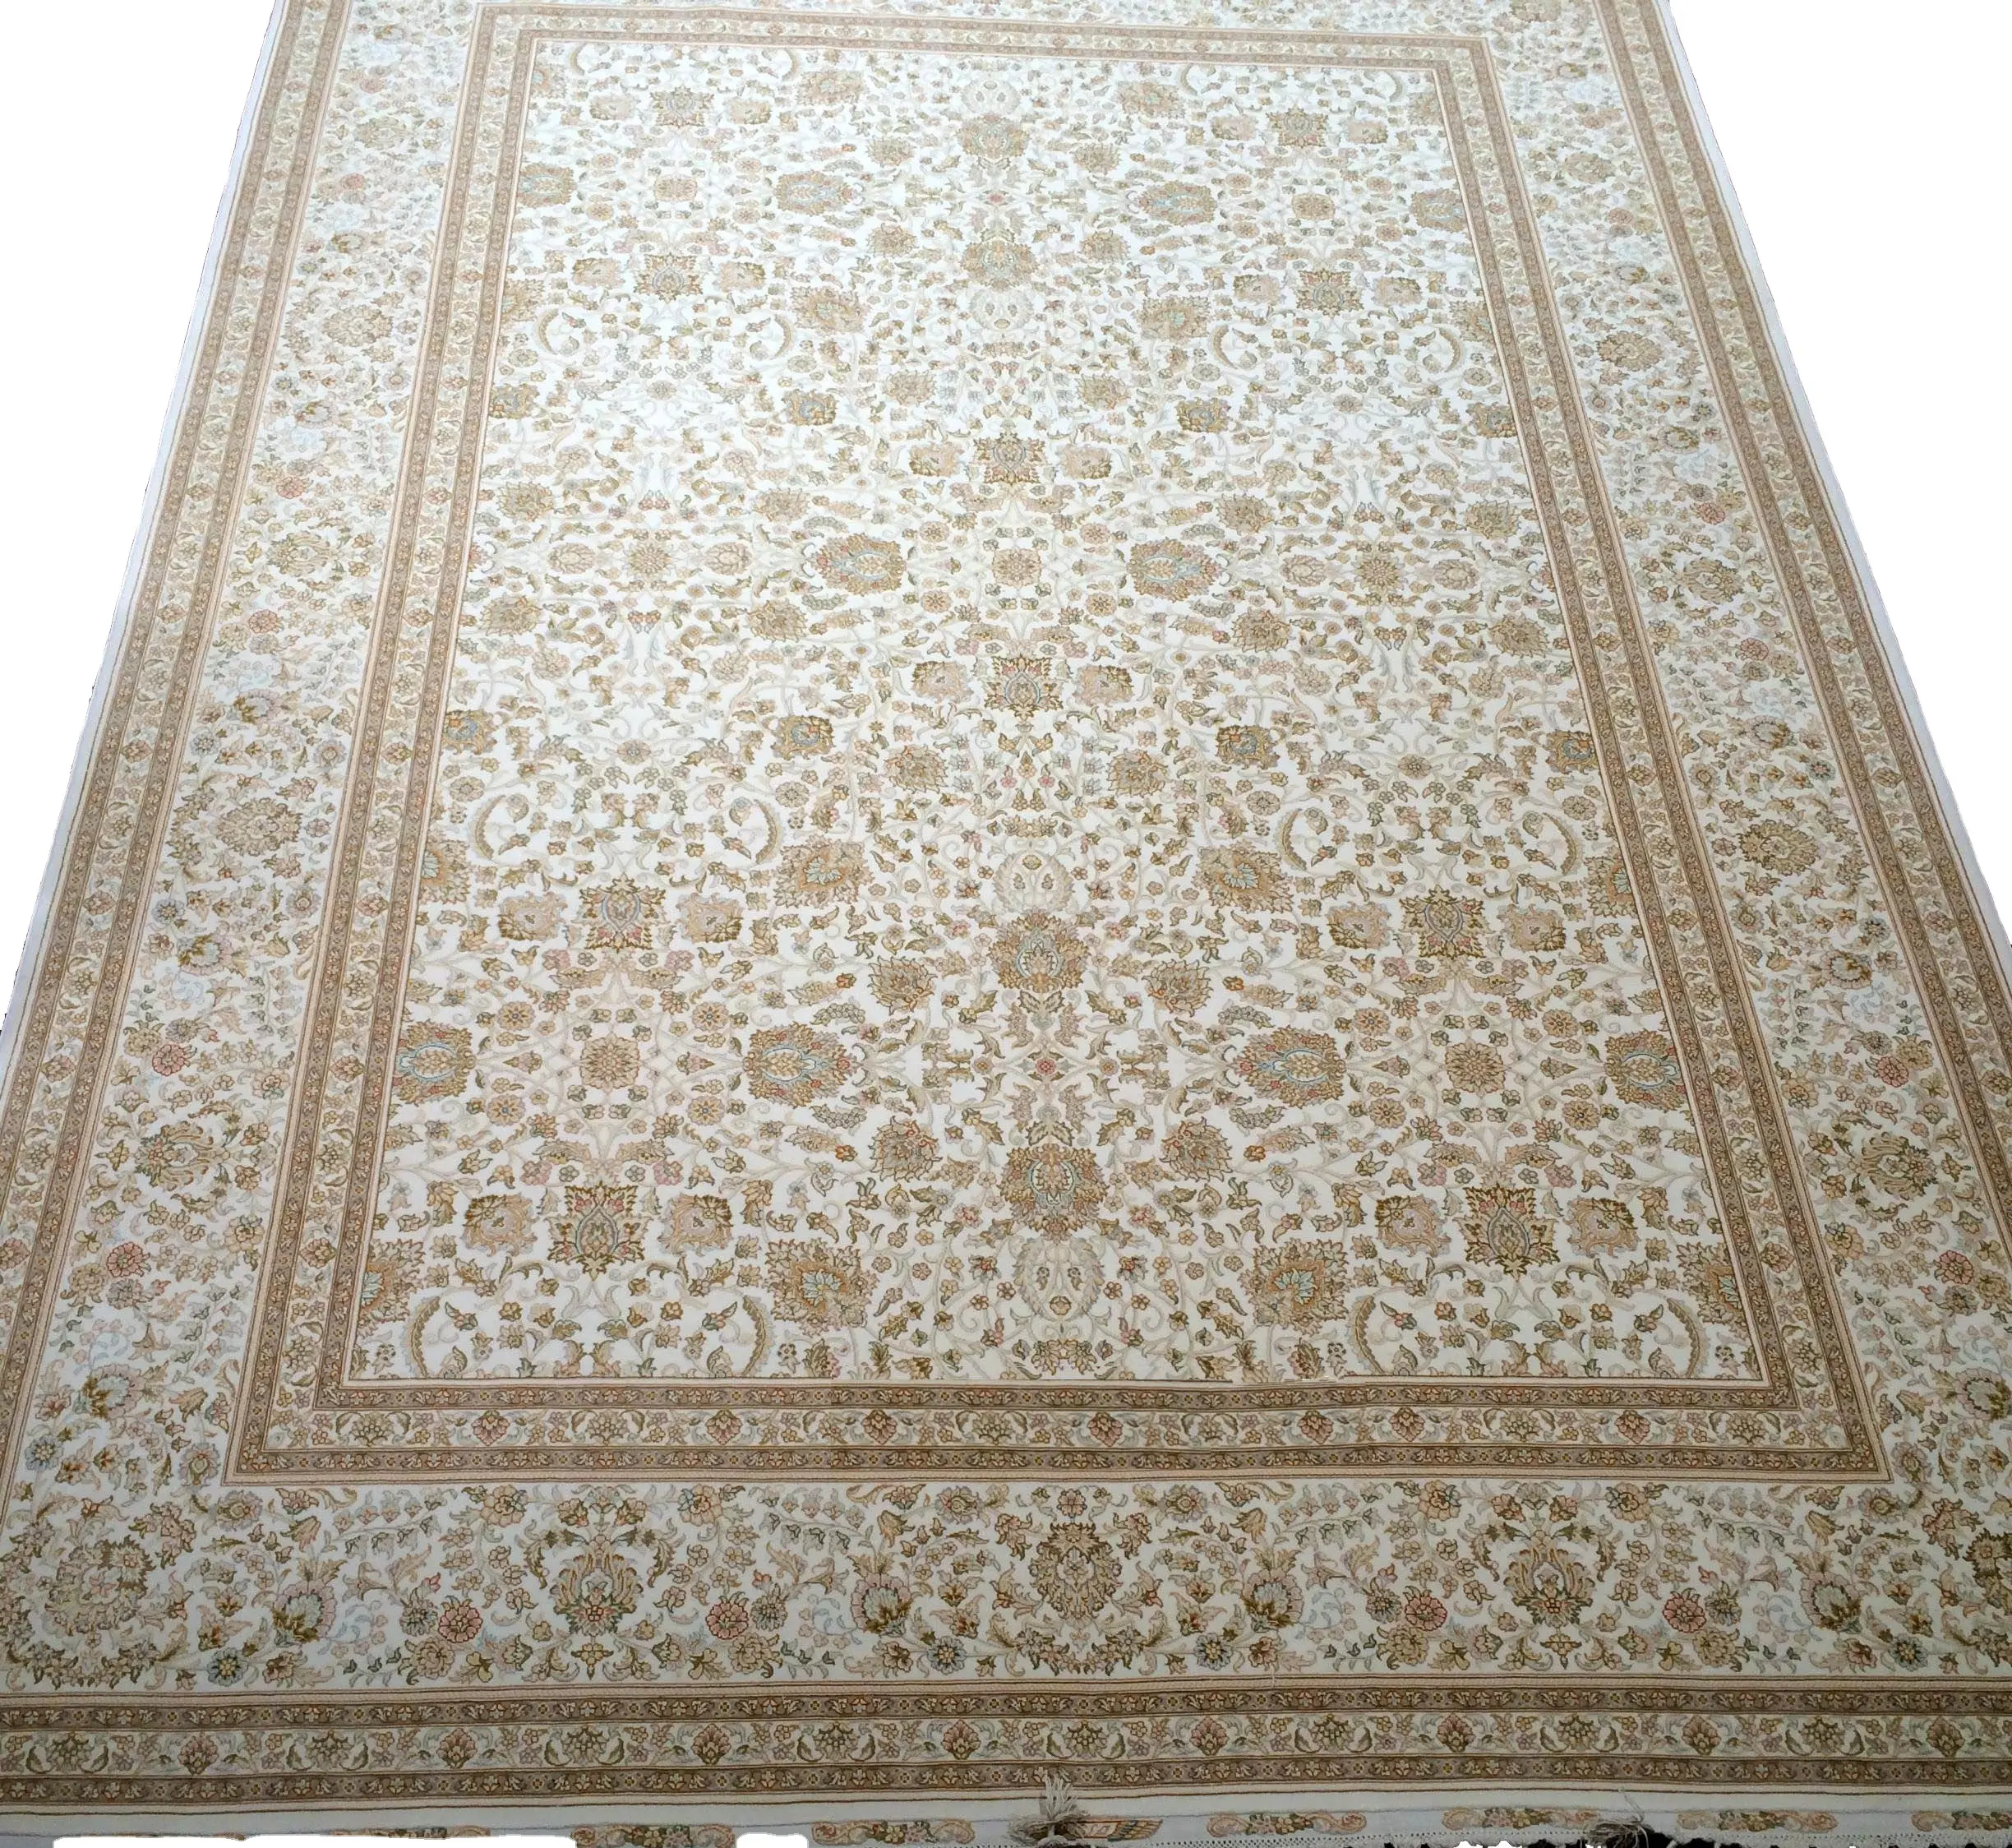 220*310cm baby's breath hand knotted wool silk mixed indoor outdoor area decorative rugs indian handmade prayer carpets